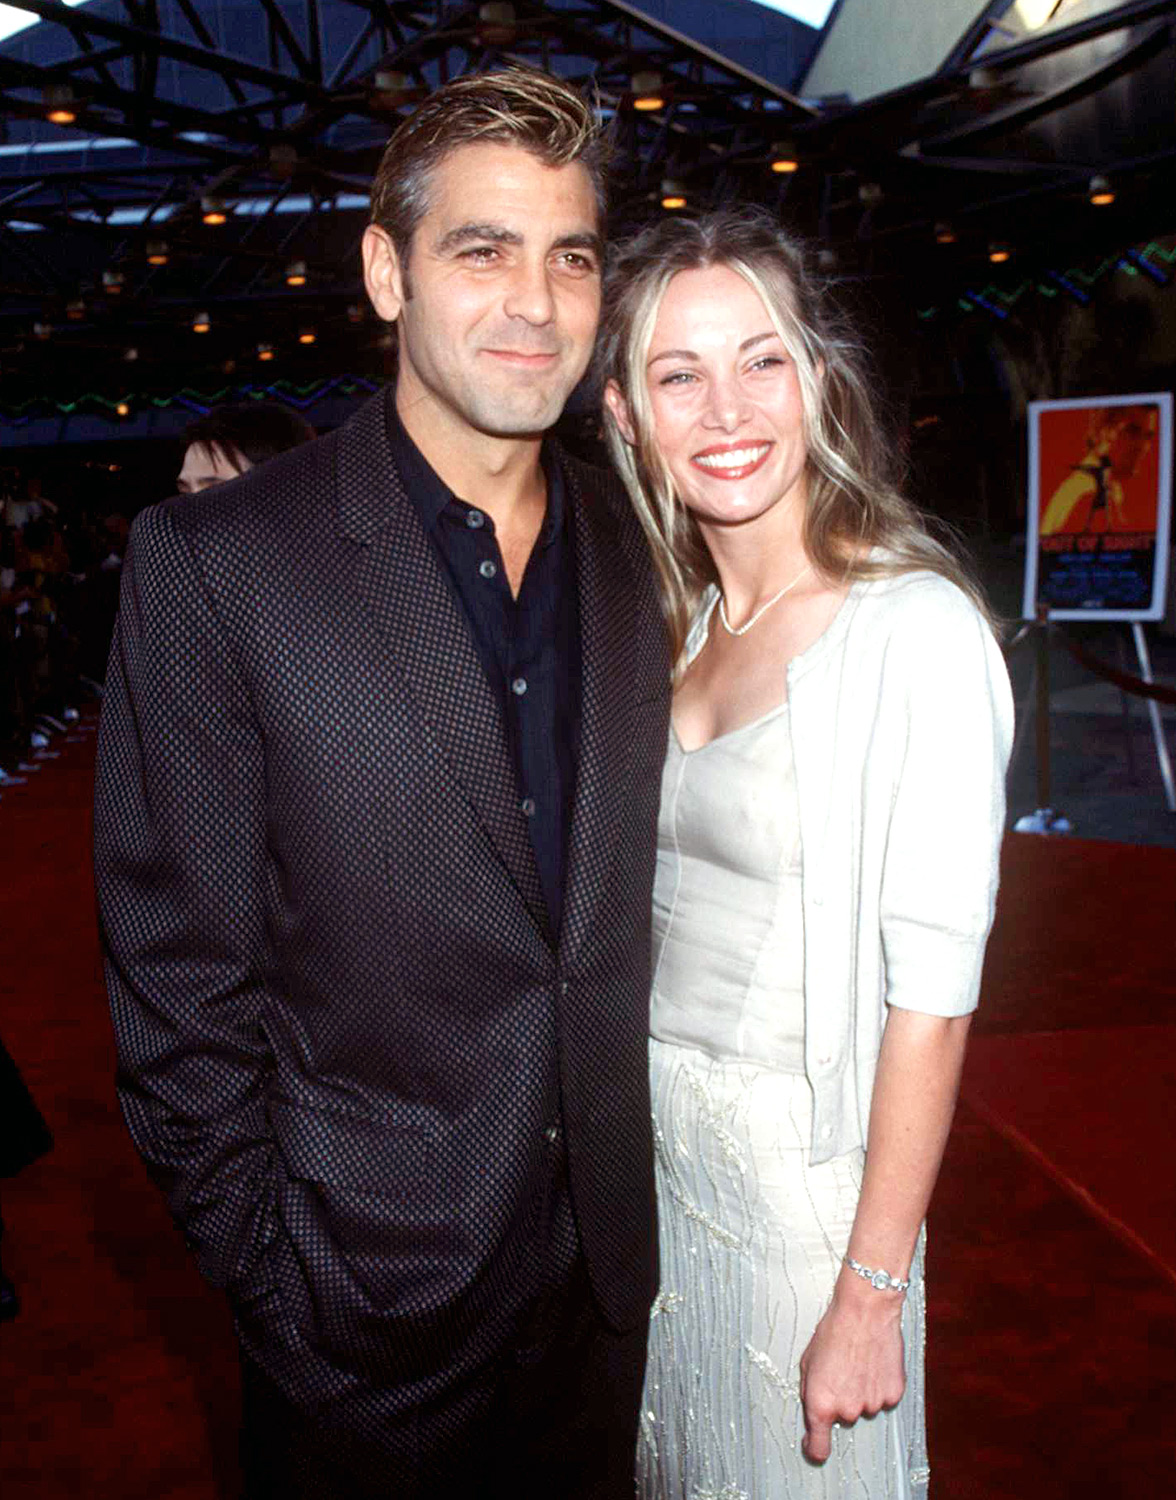 Who dated george clooney